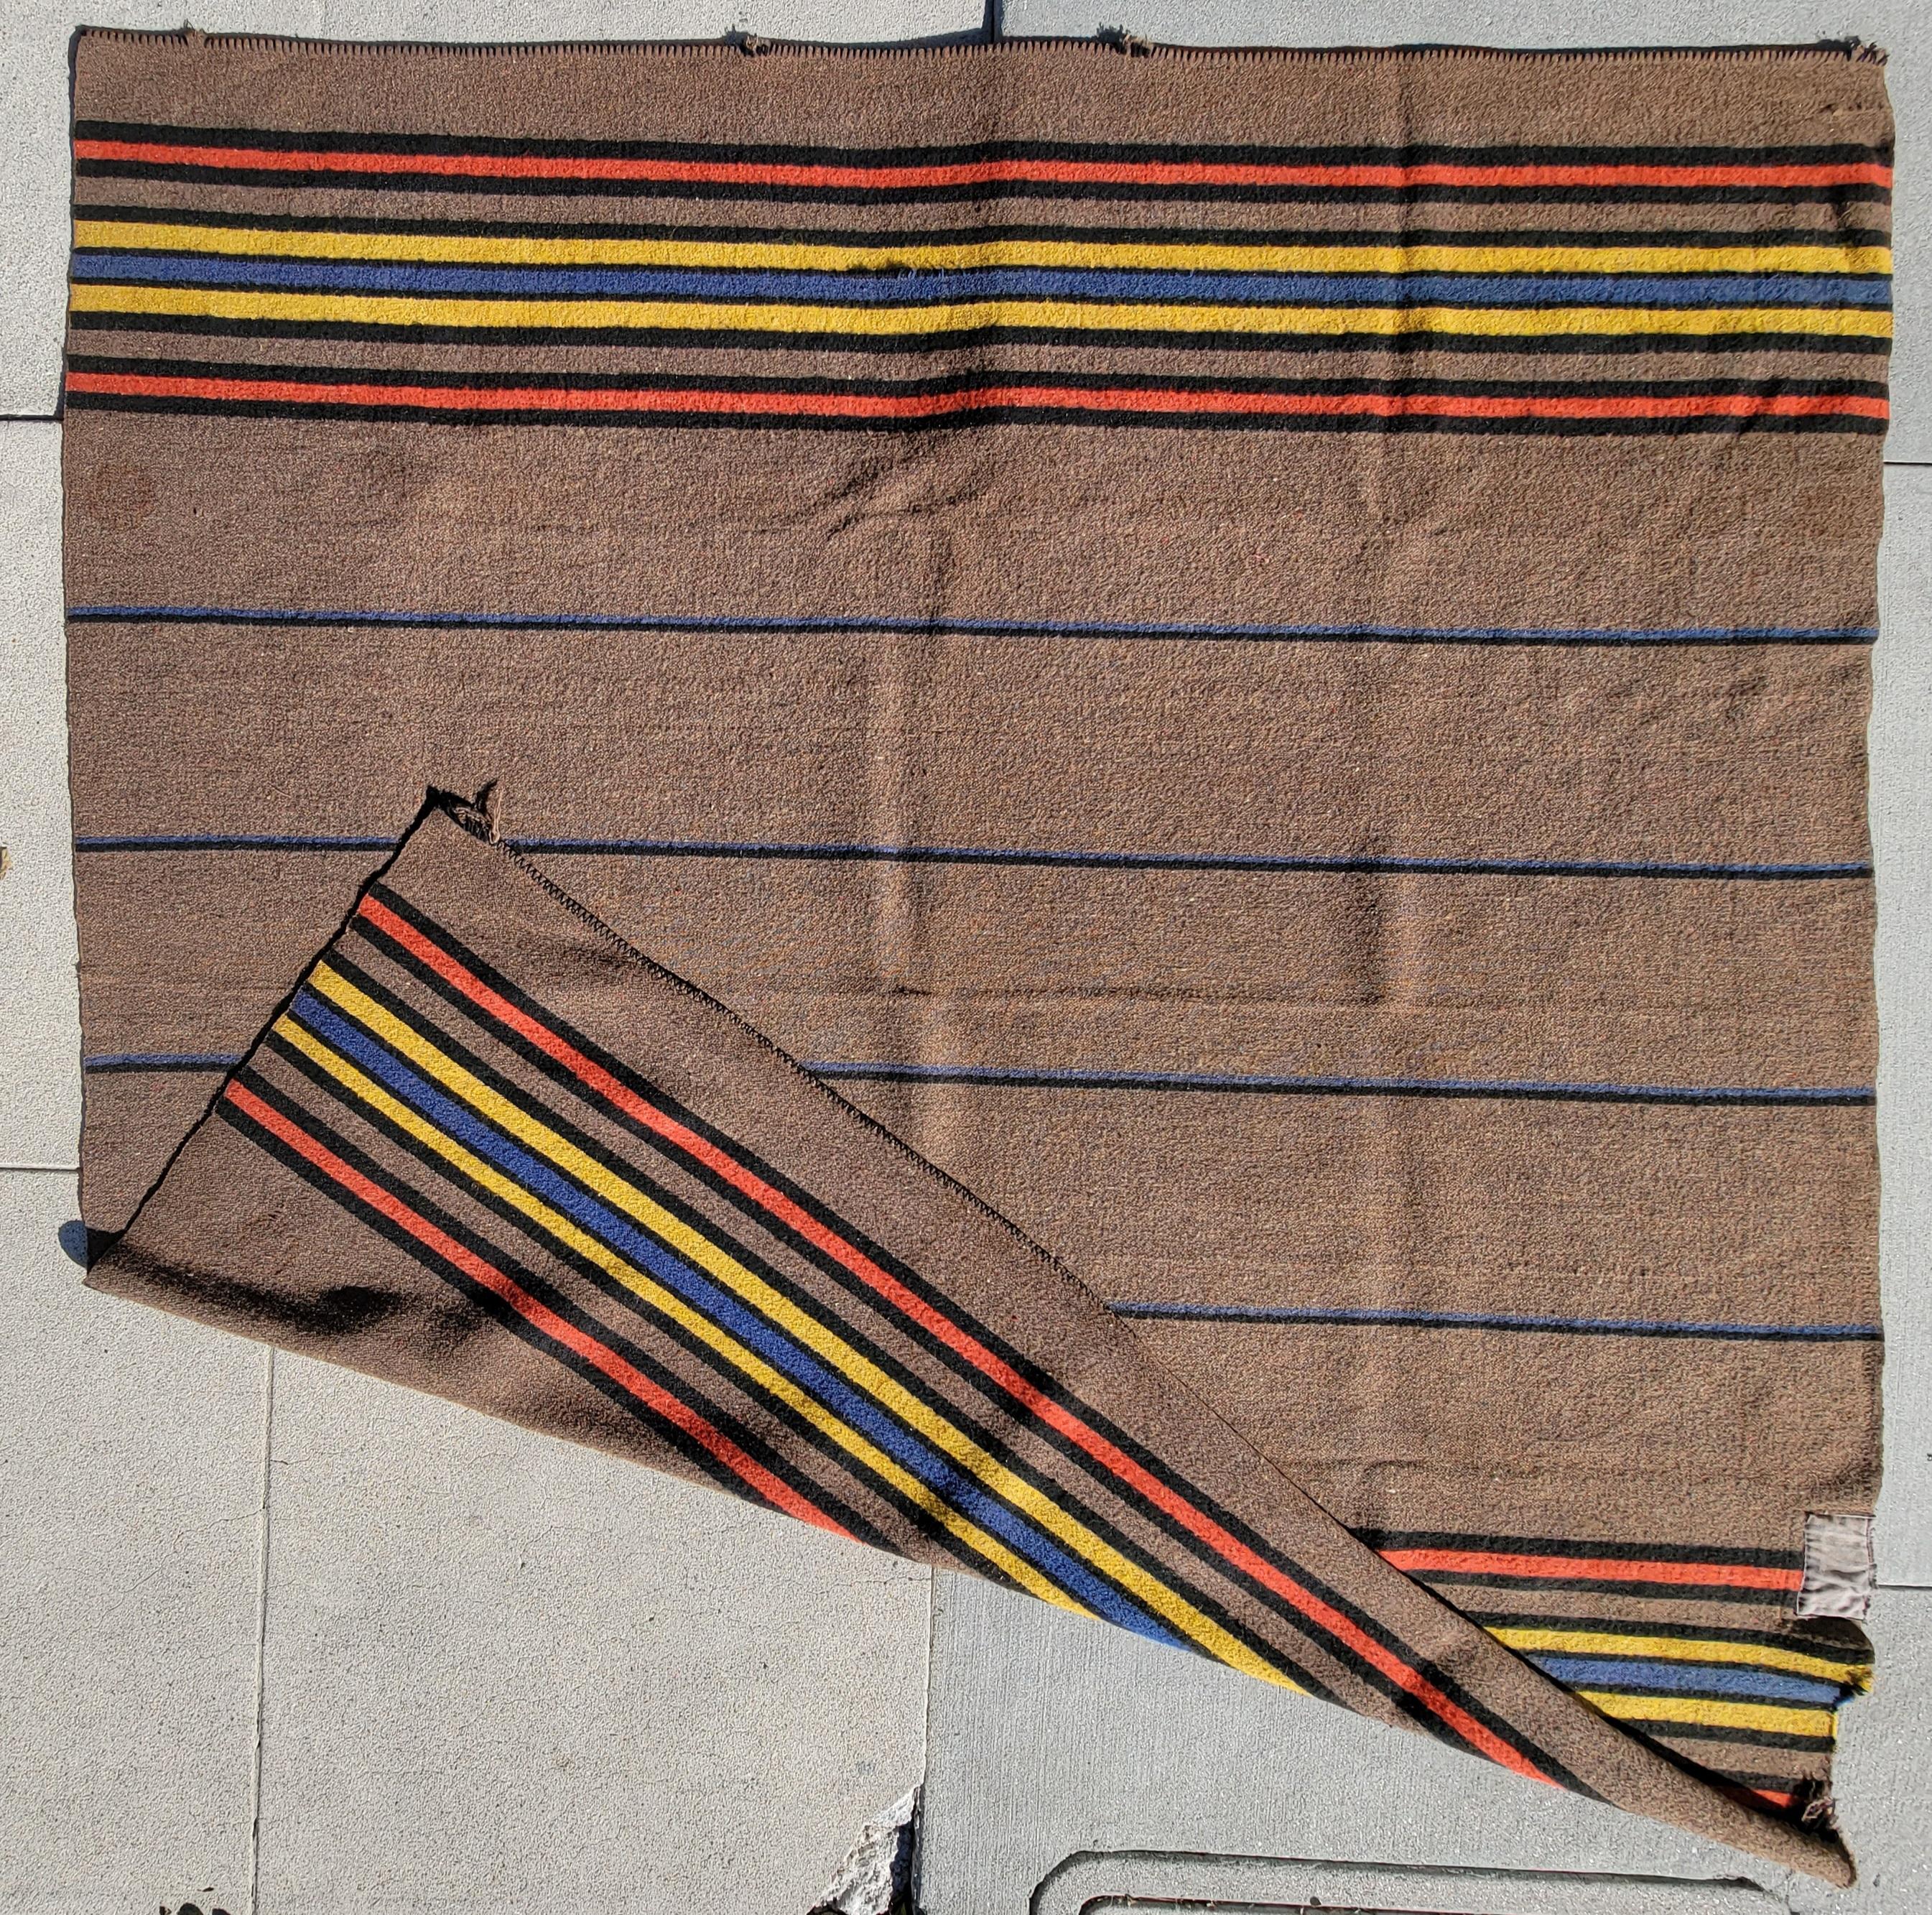 Striped all wool blanket with majority brown background, thin striped colorful accents provide a small touch of variety. There are some areas of wear to the edges. There is a patch on one side. This blanket is usable and very sturdy.